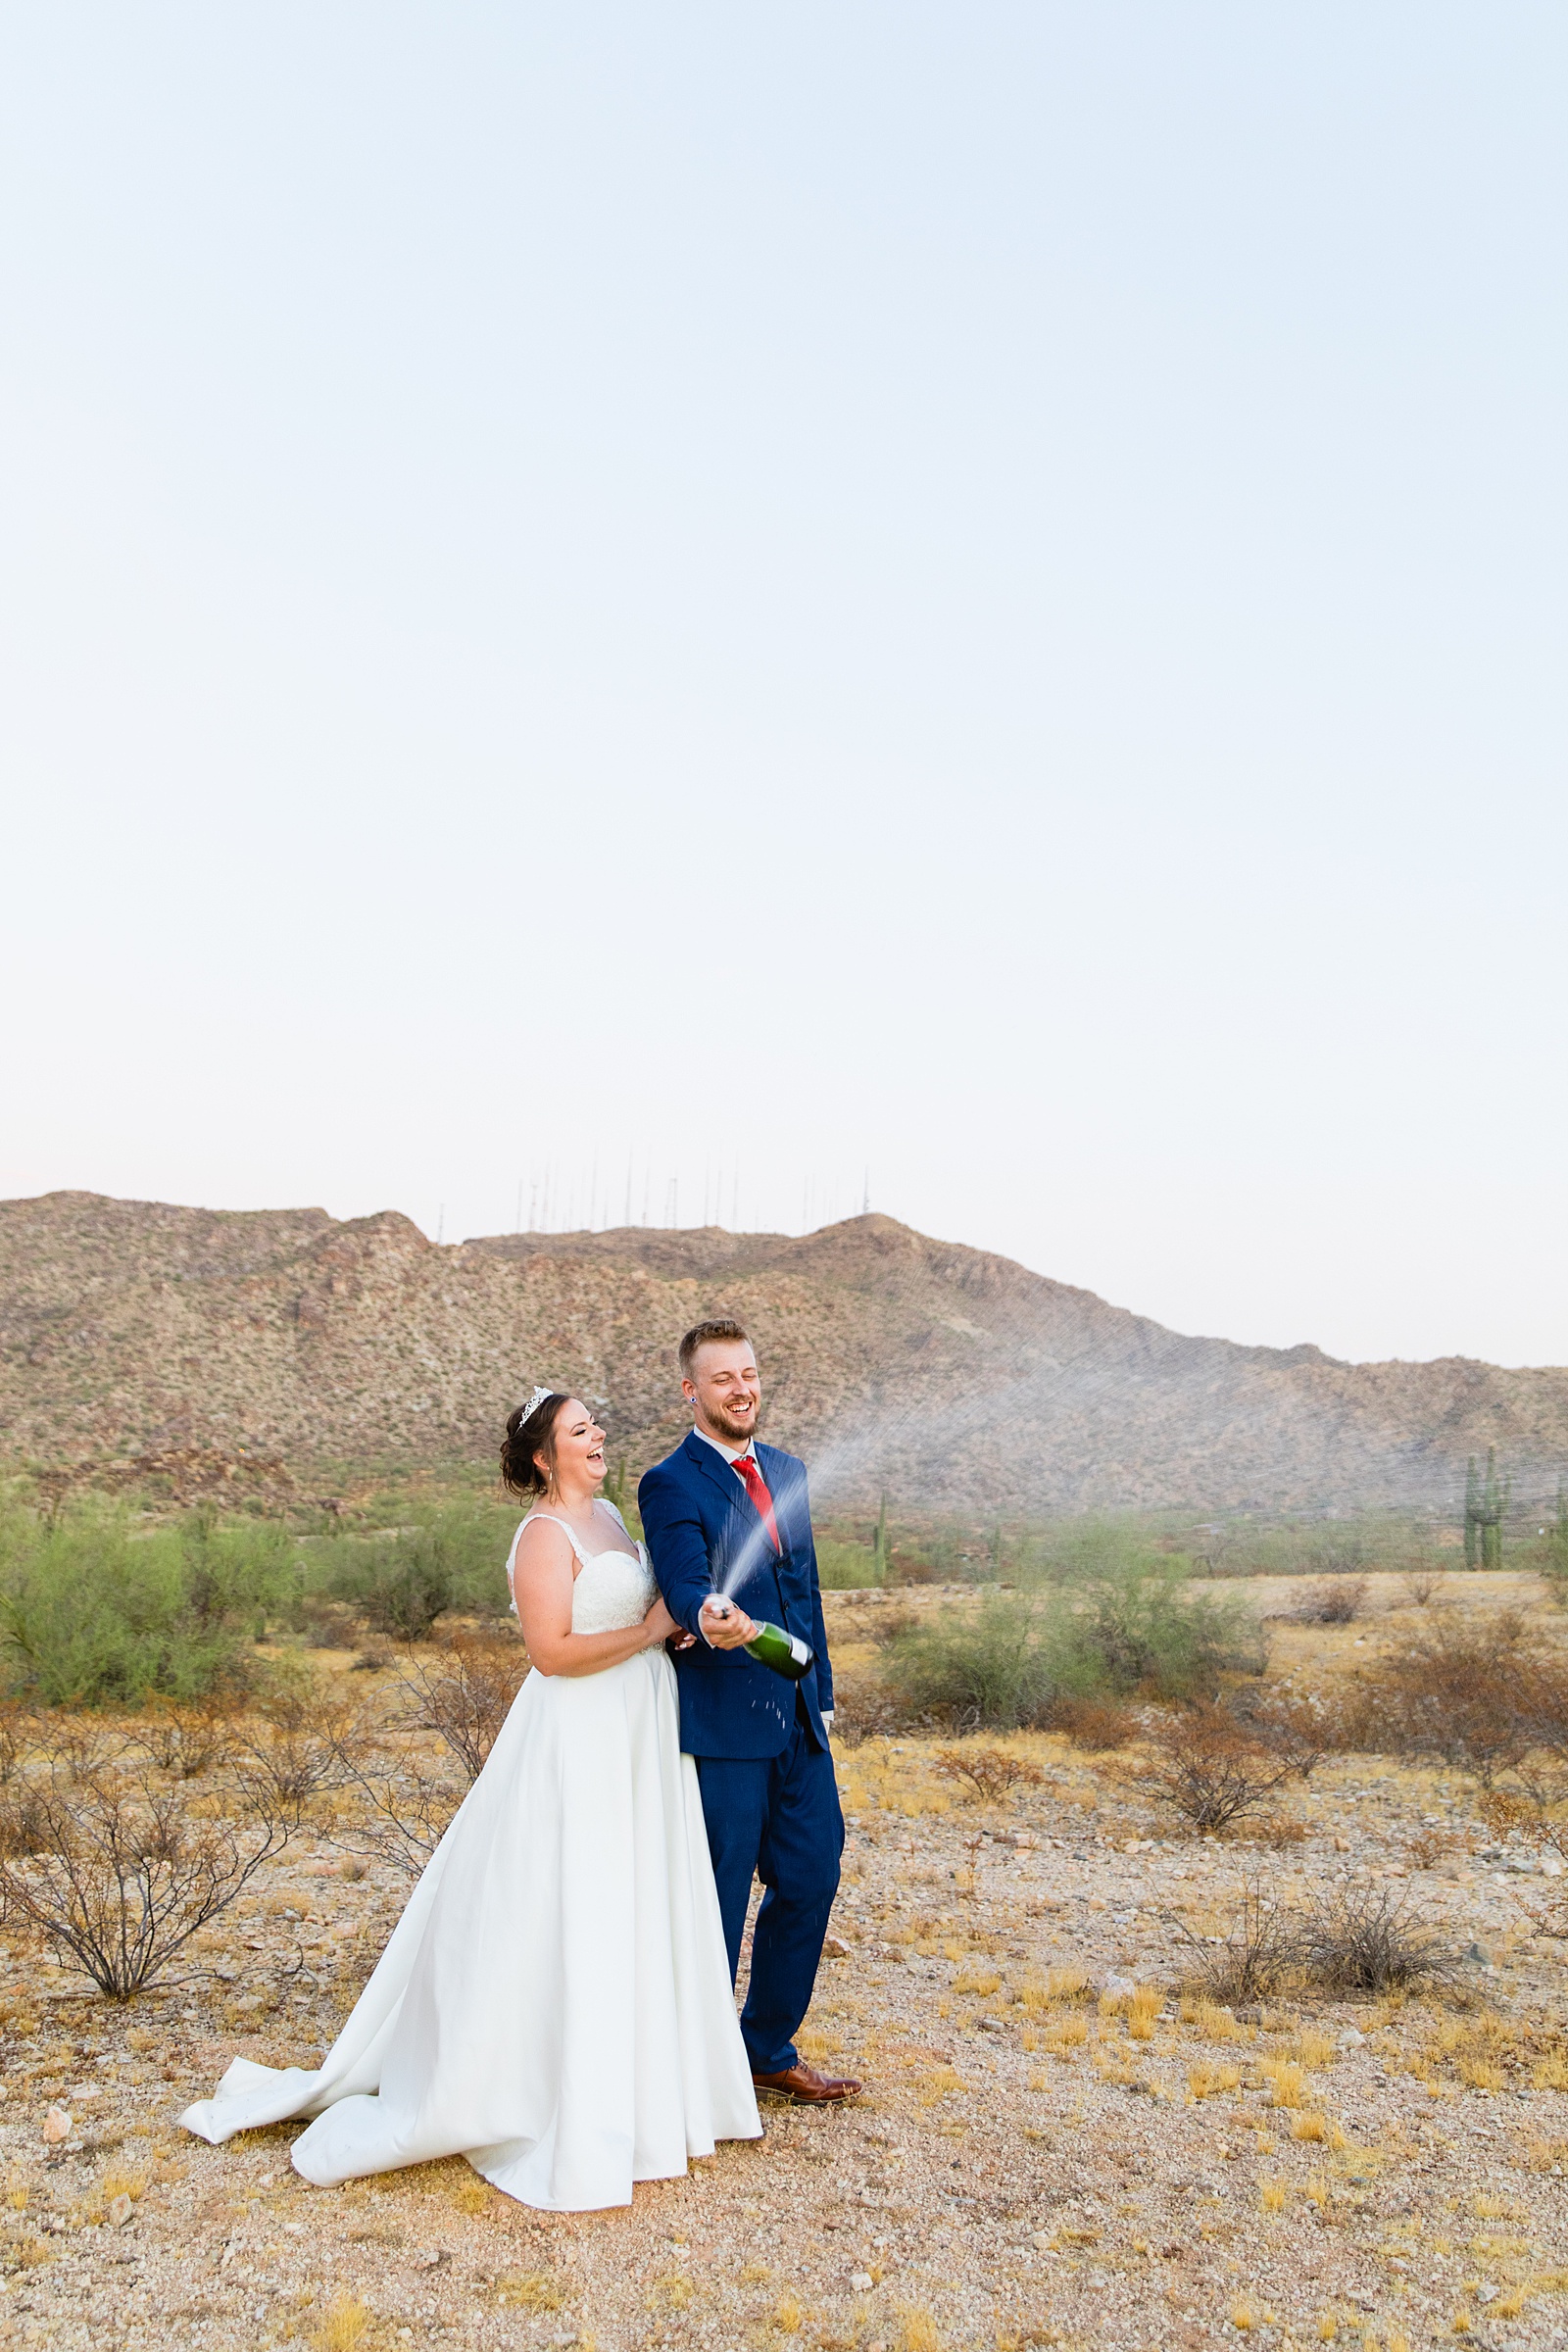 Bride and groom popping champagne together during their intimate desert wedding by Arizona wedding photographer Juniper and Co Photography.